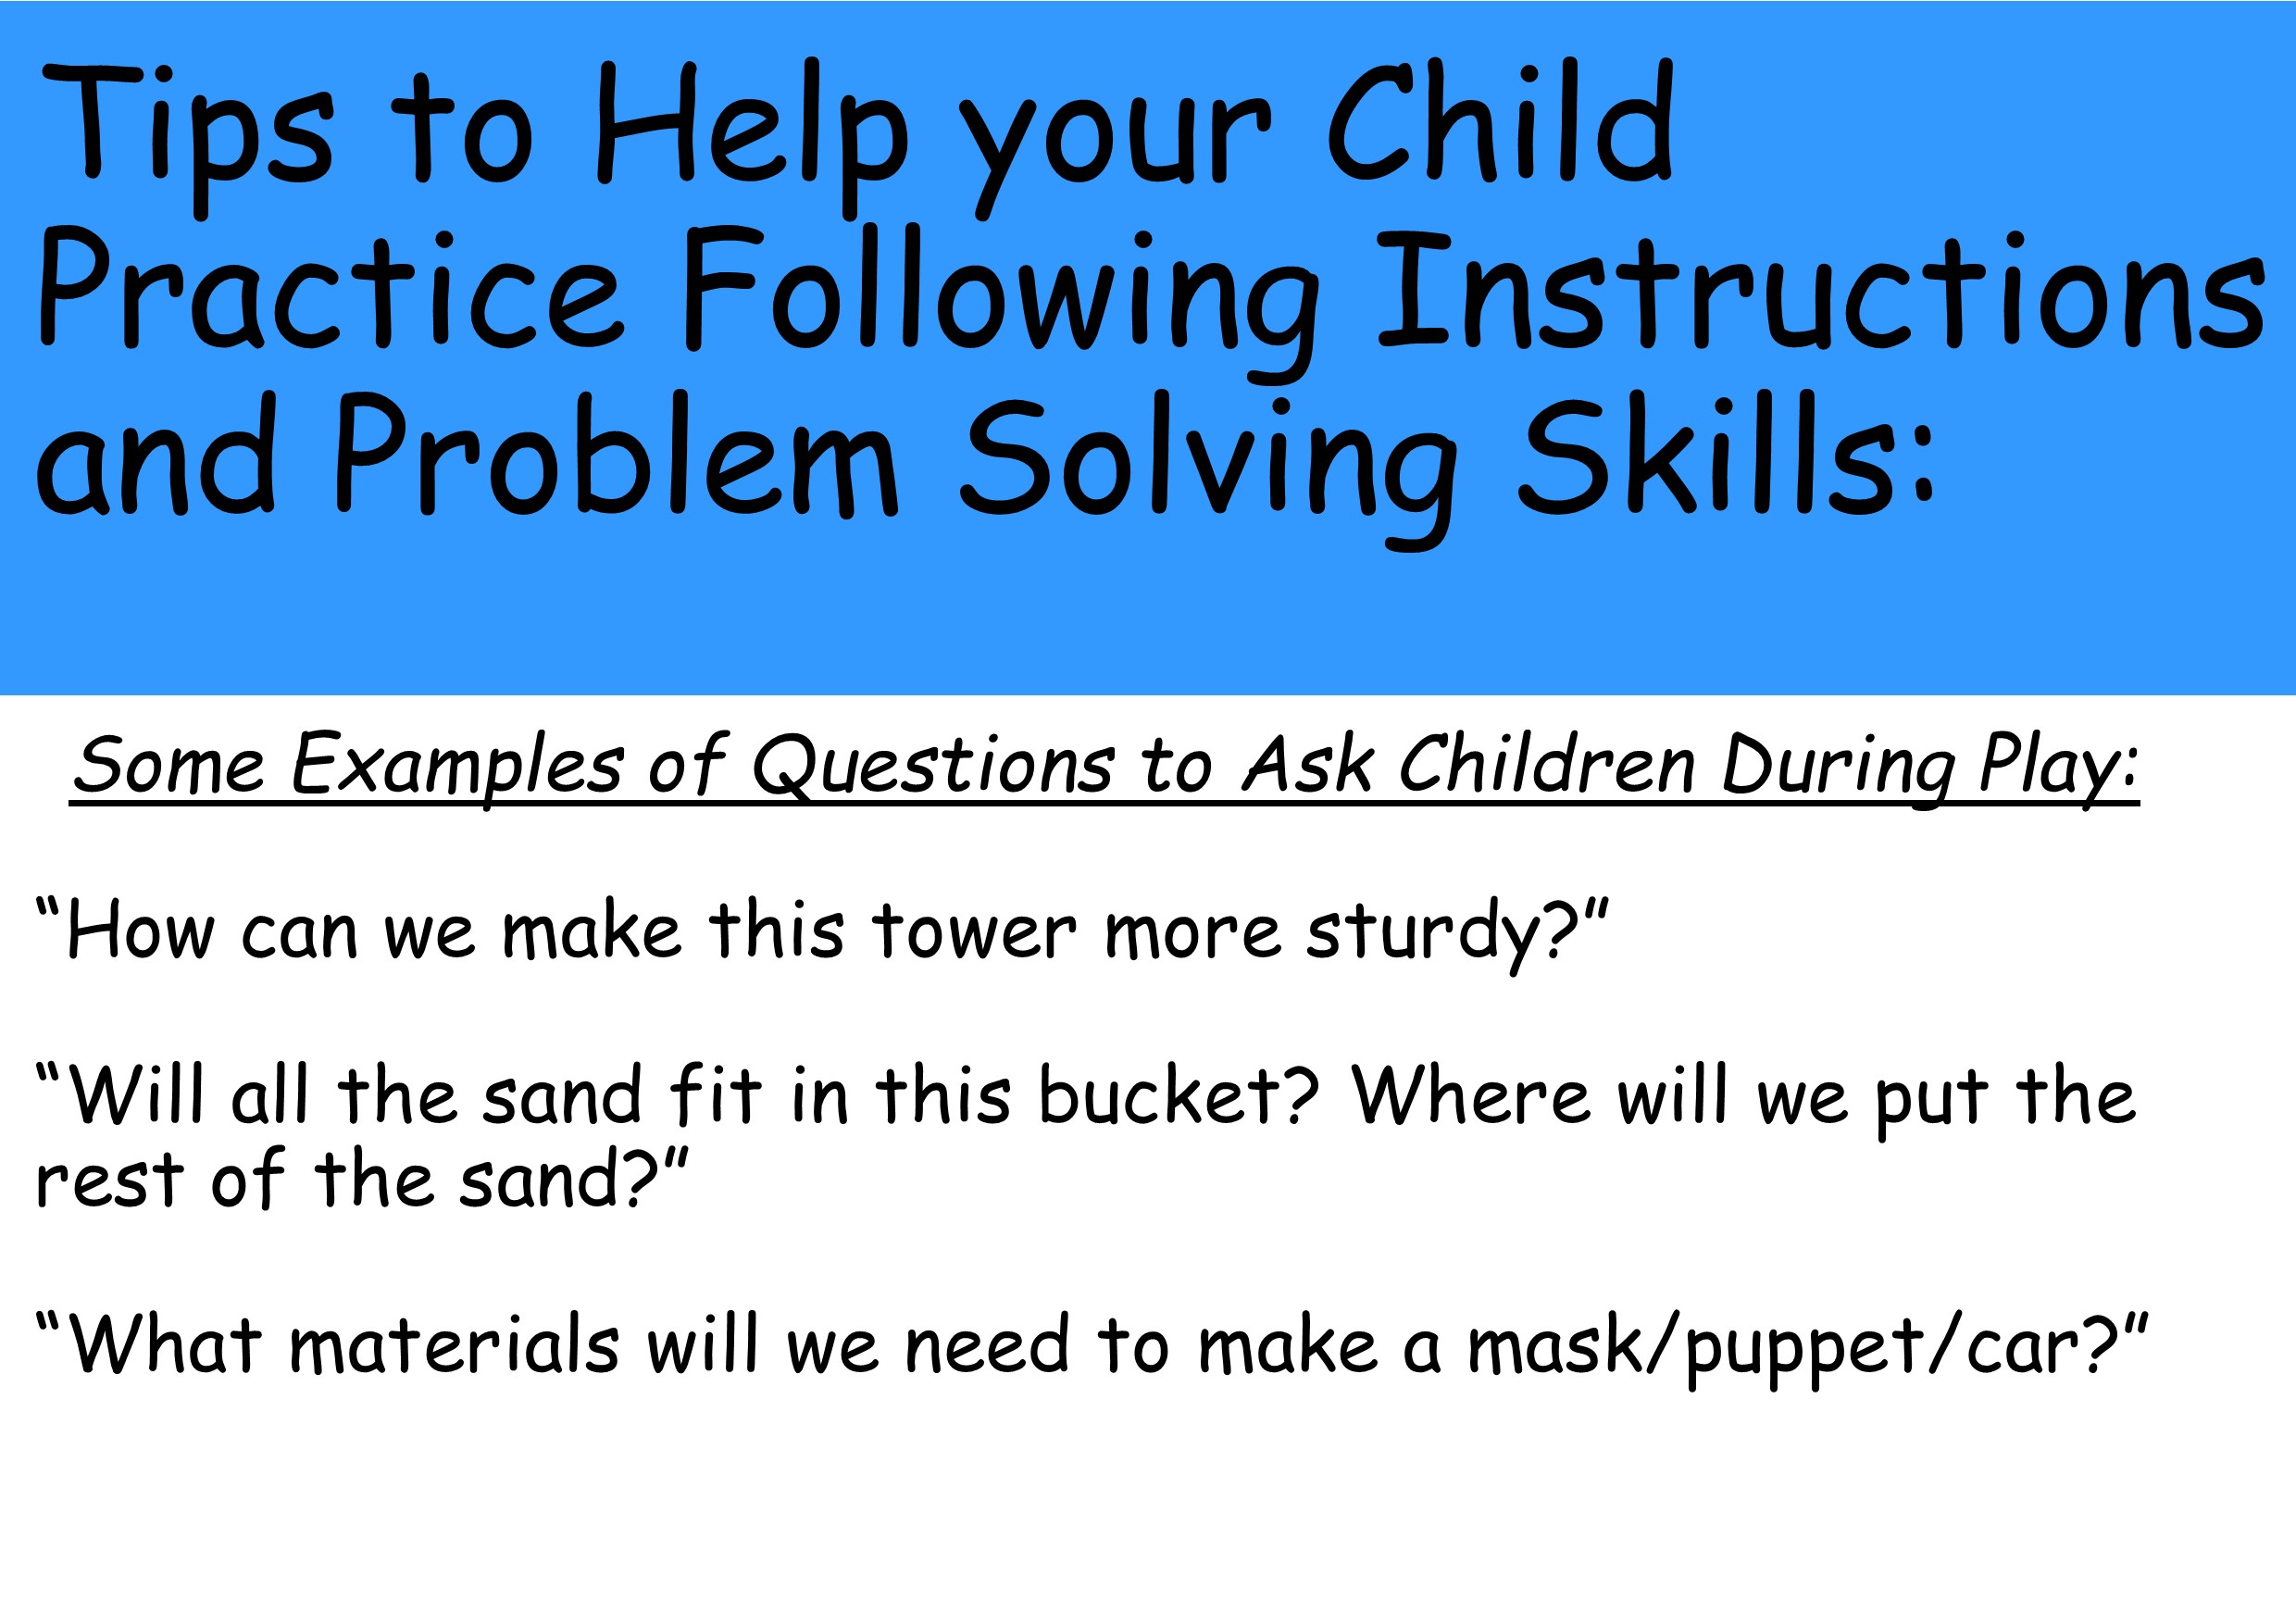 Tips to help your child practice following instructions and problem solving skills 